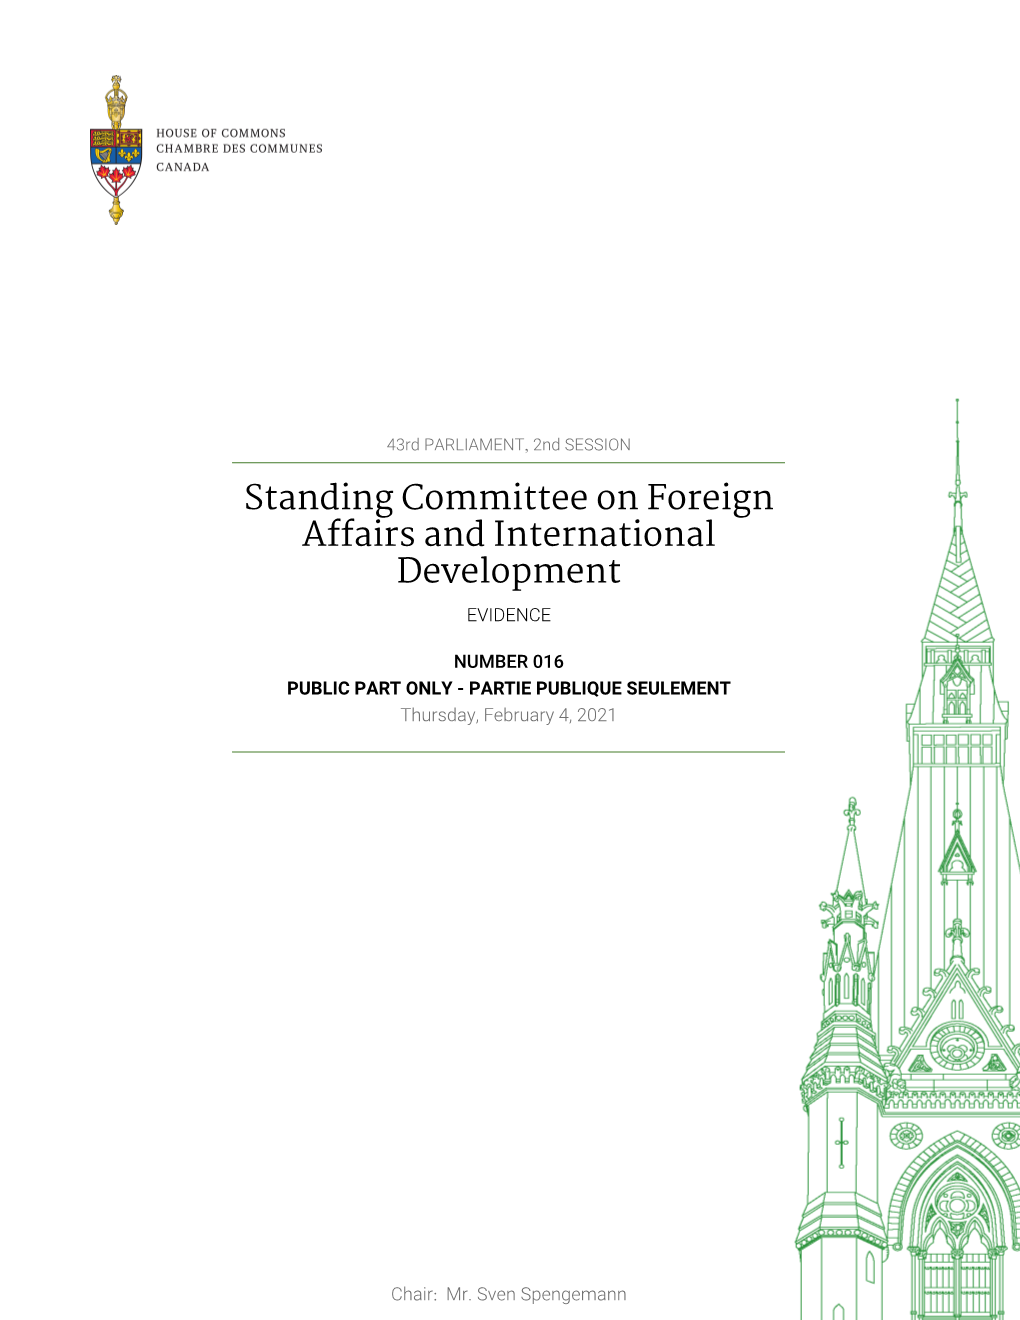 Evidence of the Standing Committee on Foreign